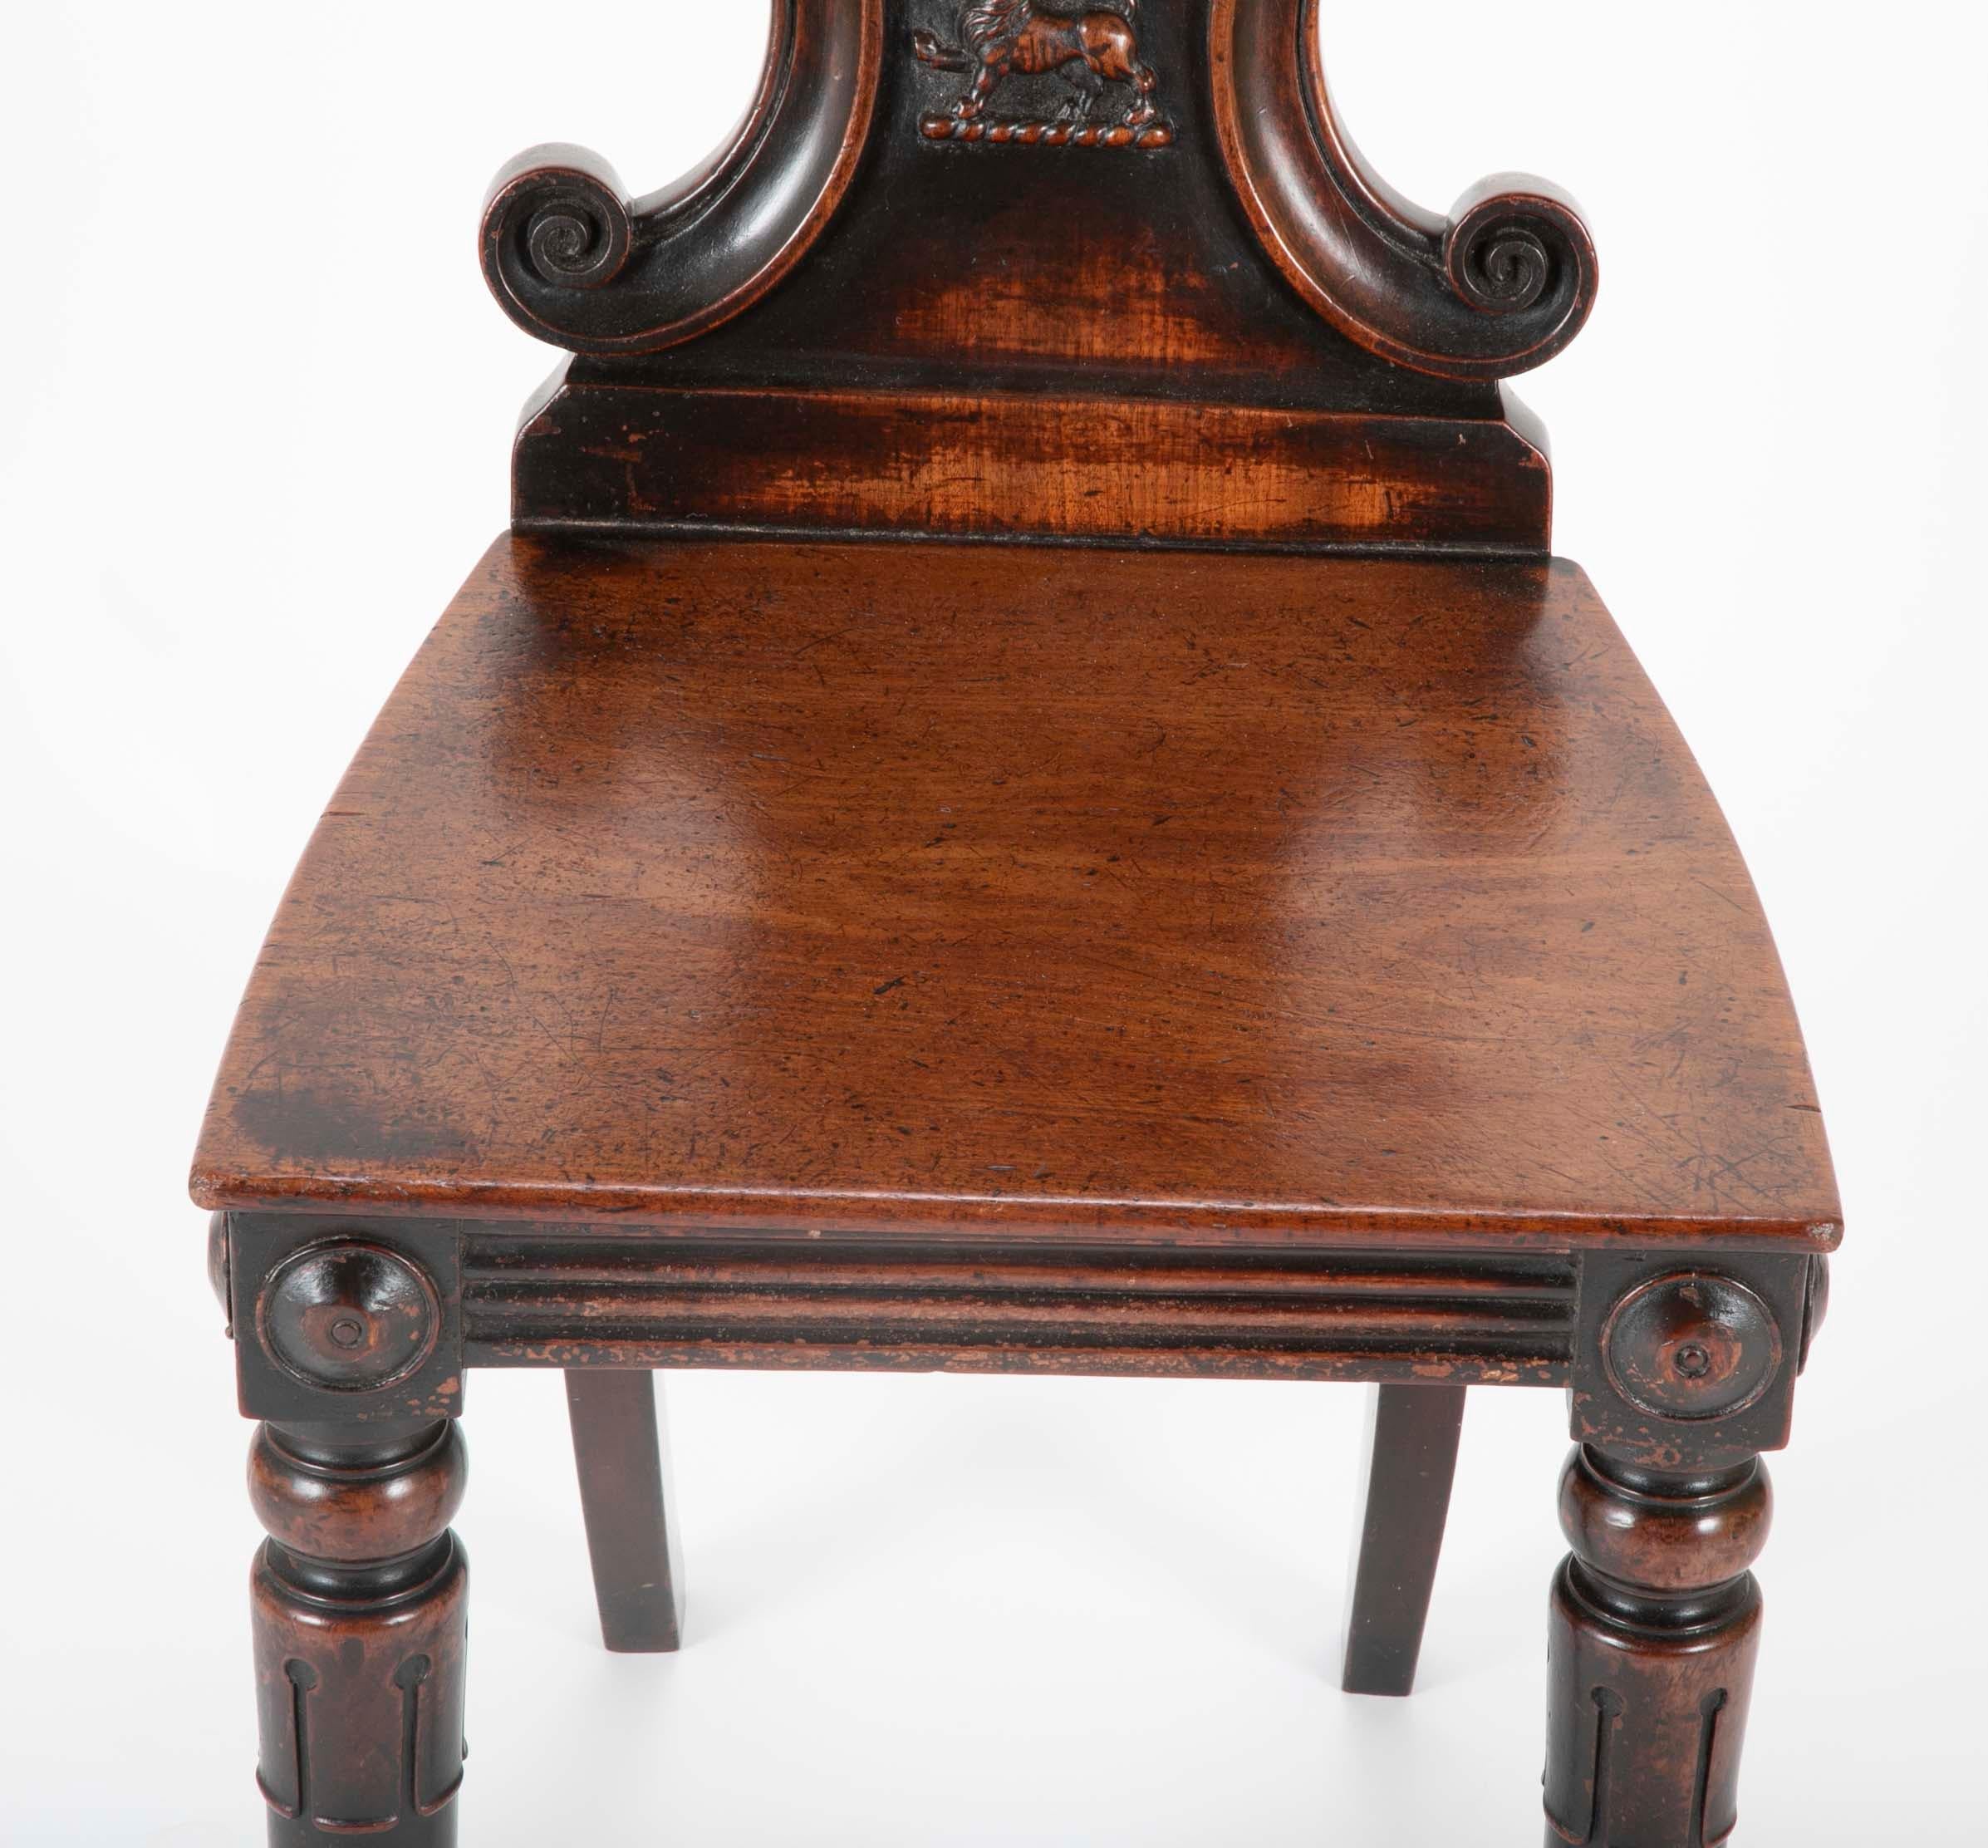 English Early 19th Century Georgian Shell Back Hall Chair with Lion Carving